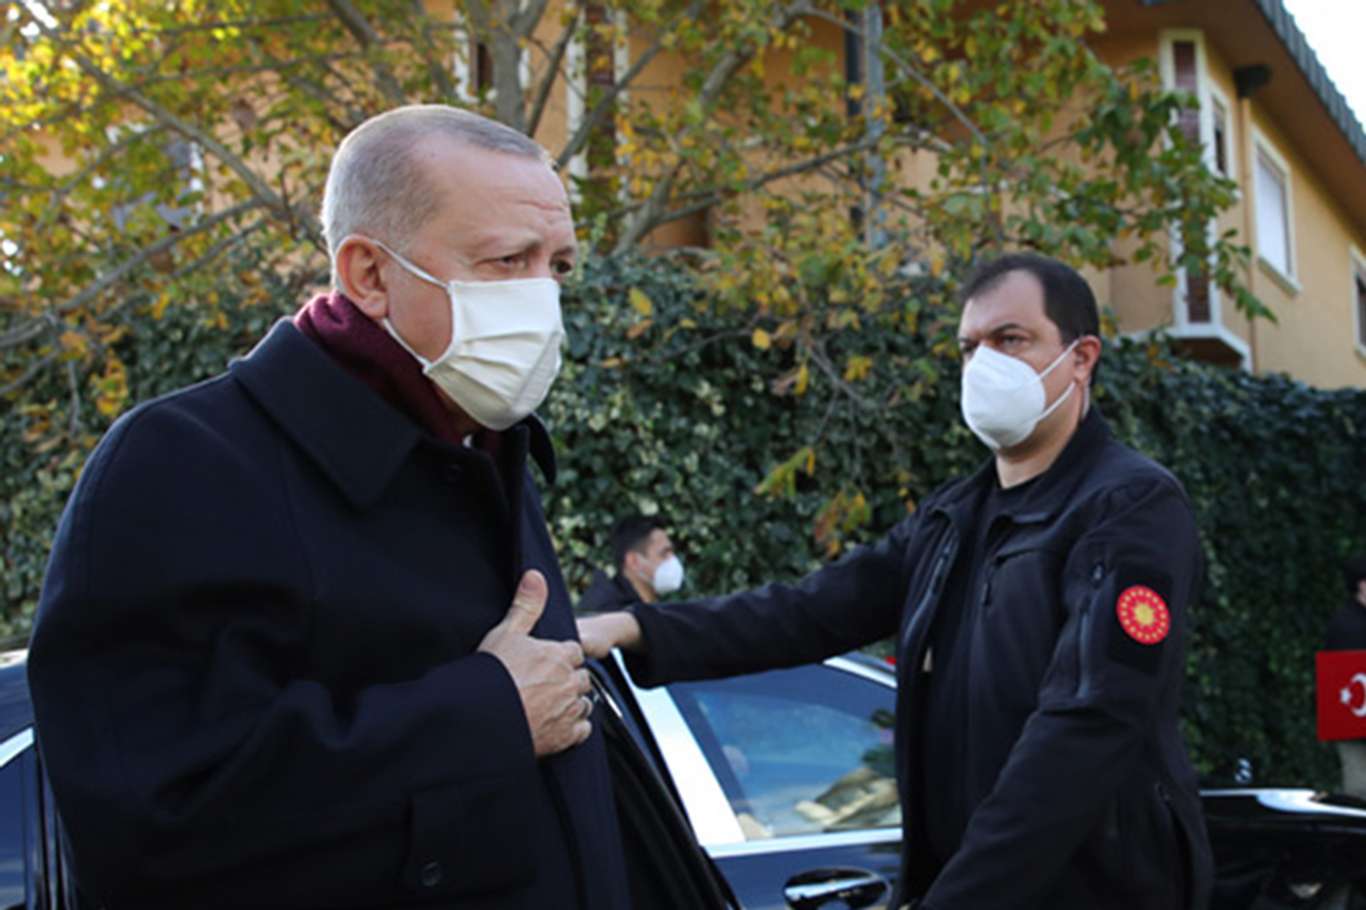 Erdoğan: Turkey does not have any infrastructural problems in the medical area